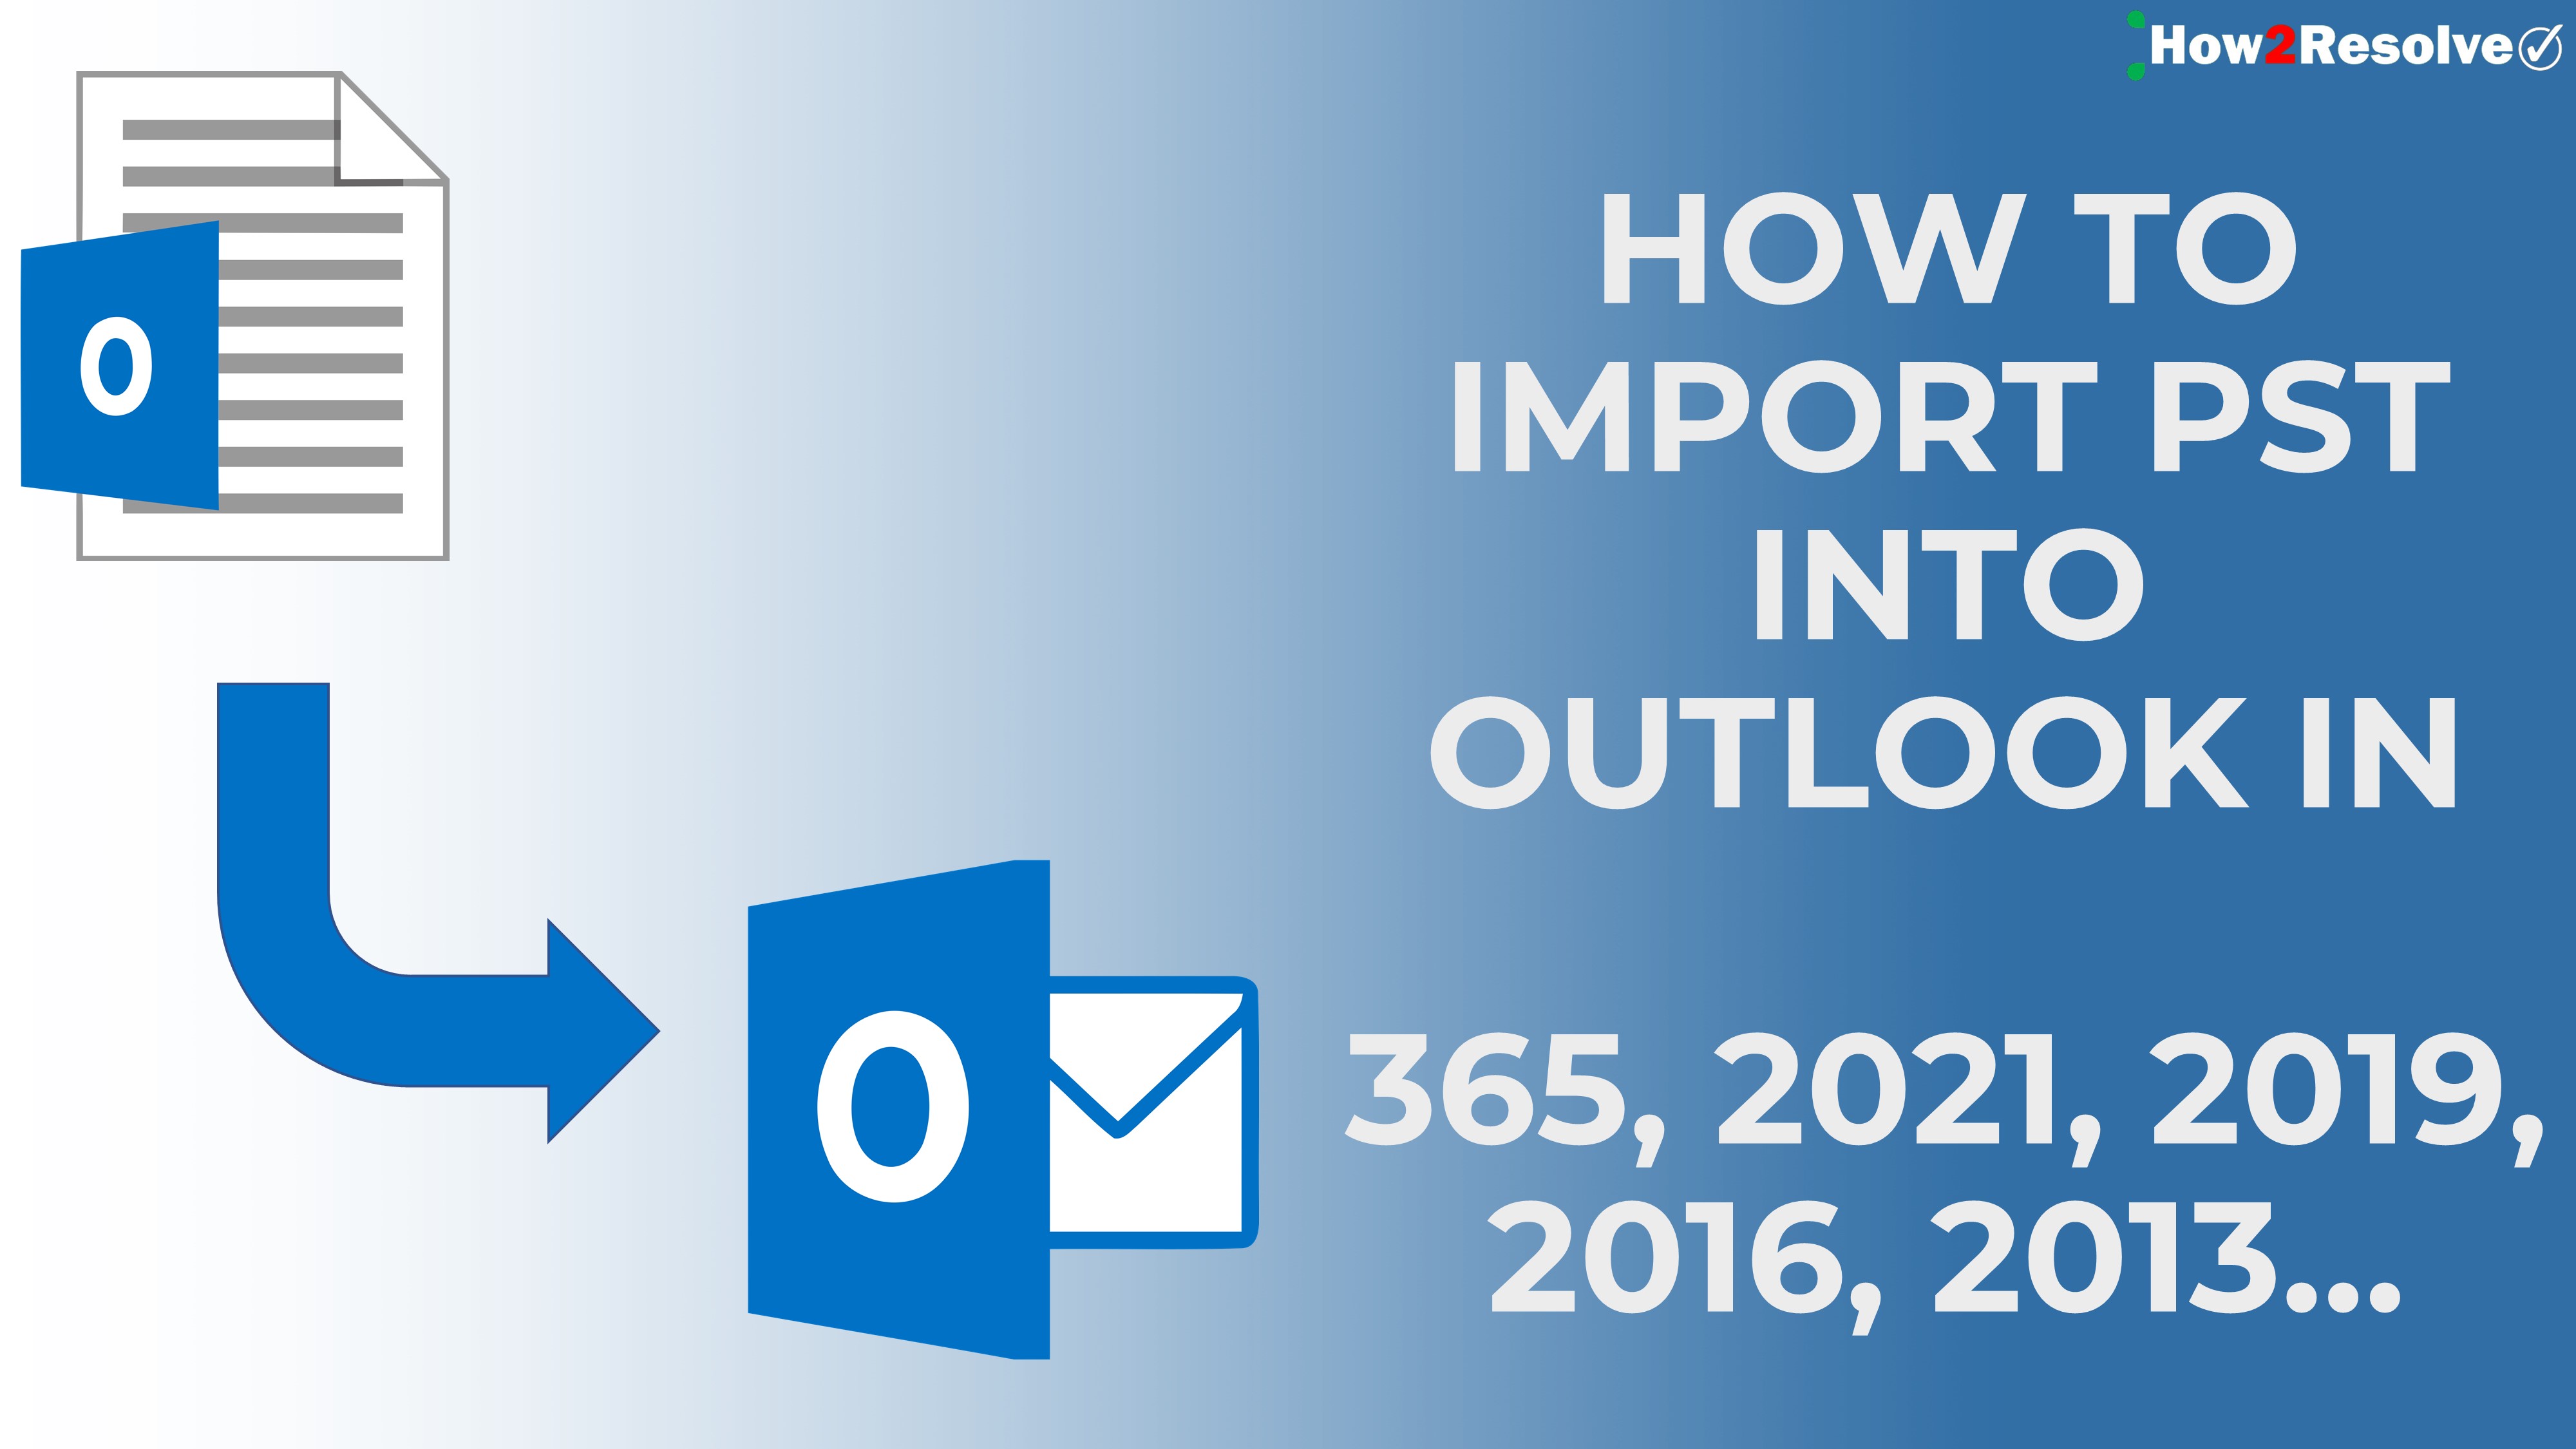 How to import a PST file into MS Outlook versions including 365, 2021, 2019, 2016, 2013, and prior editions.